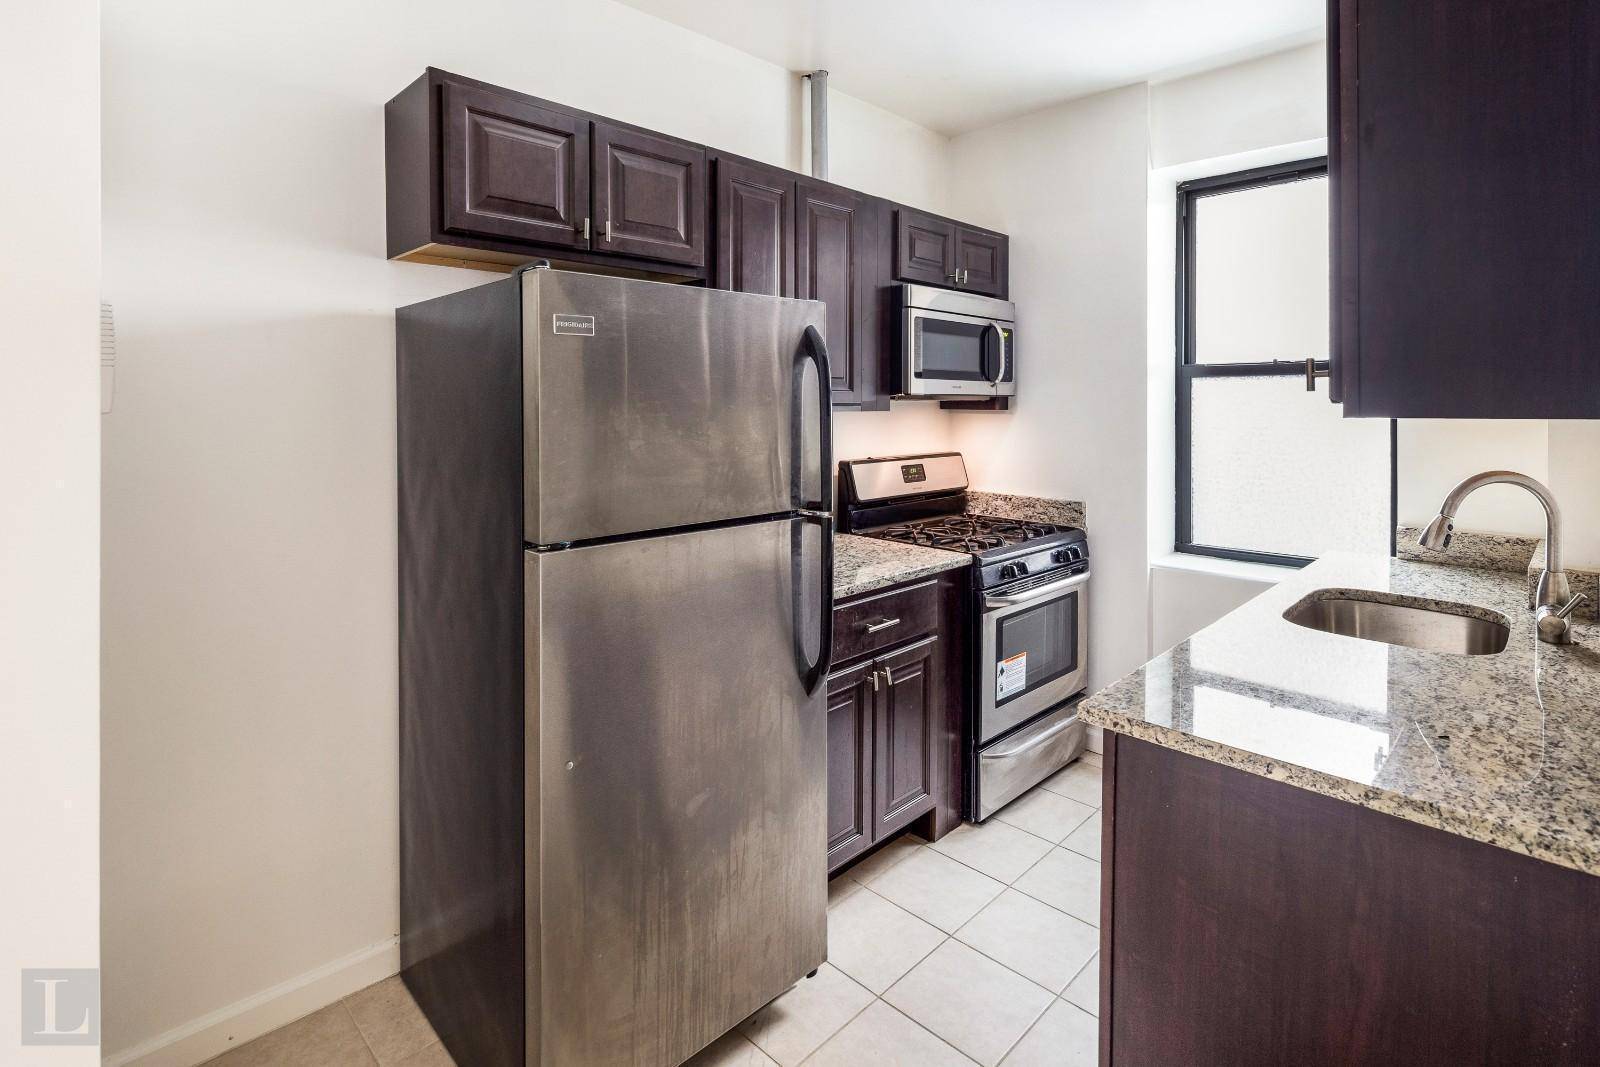 Unit Amenities NO FEE Gut Renovated Stainless Steel Granite Kitchen Microwave Gut Renovated Bathroom with floor to ceiling tile Brand new hardwood floors Abundant Closets Utilities Included Heat and Hot ...